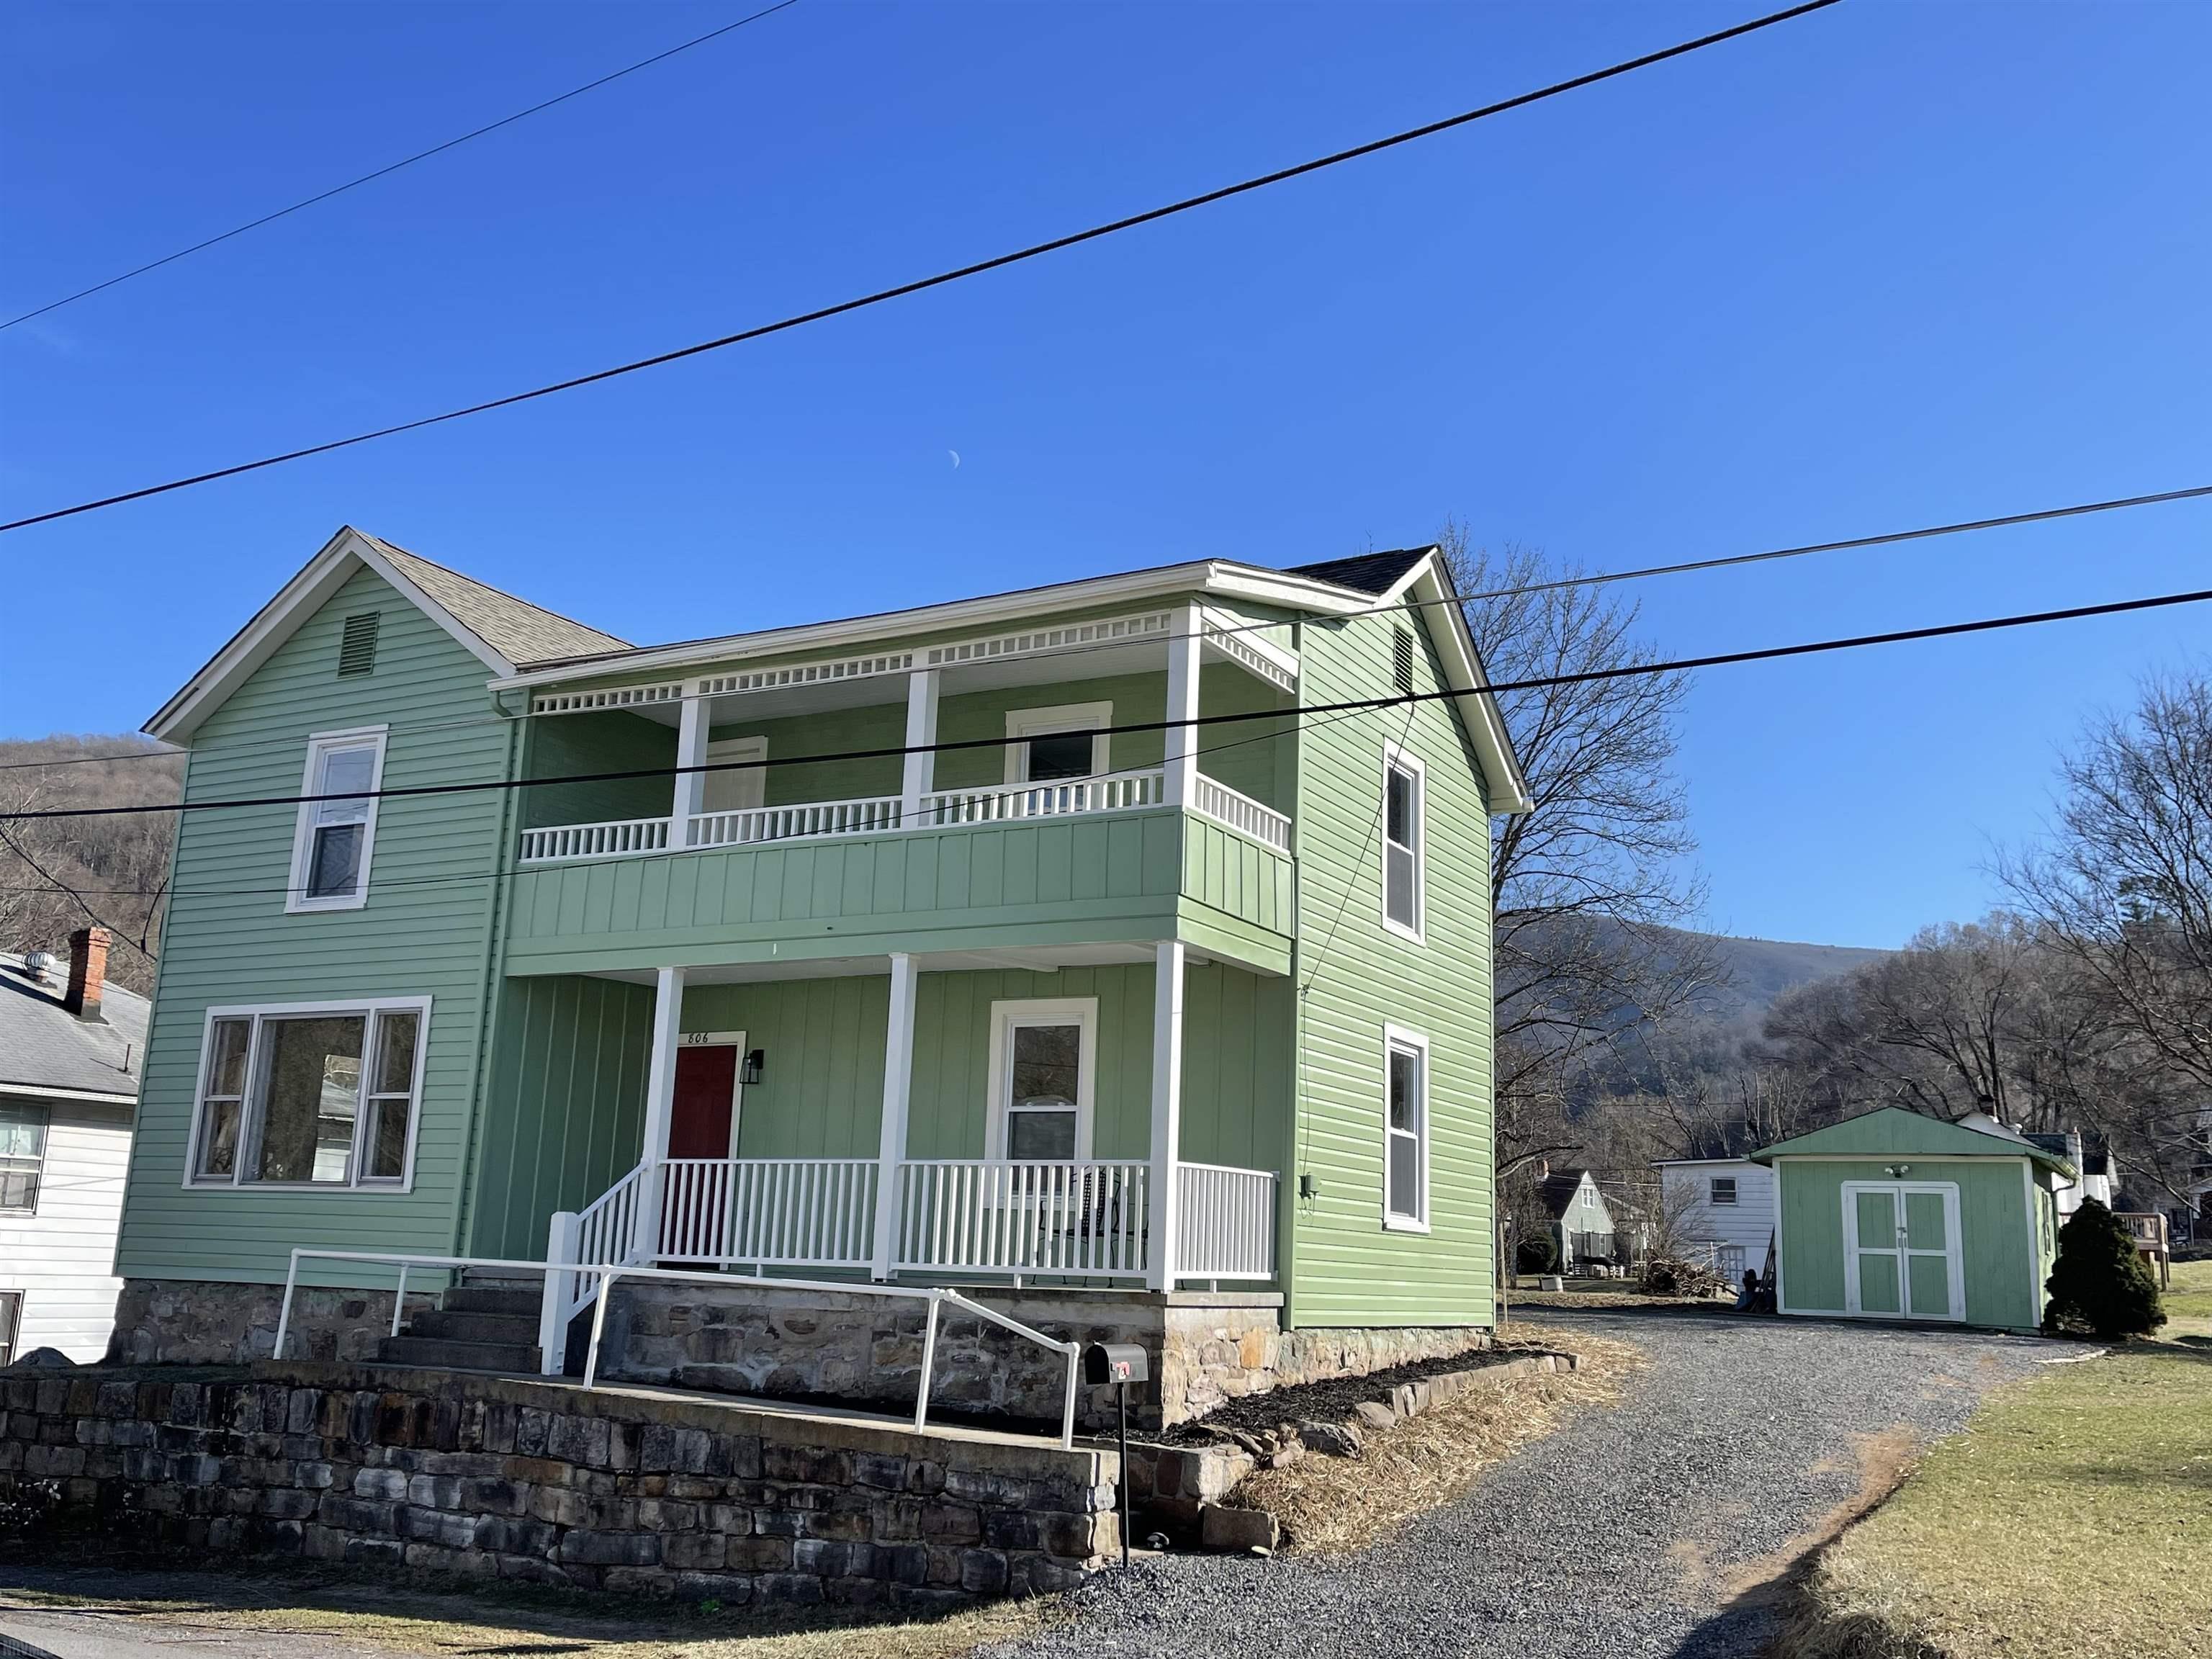 Check out this home, has the old time feel  with all the new updates needed to make you feel right at home, It  is move in ready and has lots of space for your family. Completely remodeled in 2022! Come see it today!